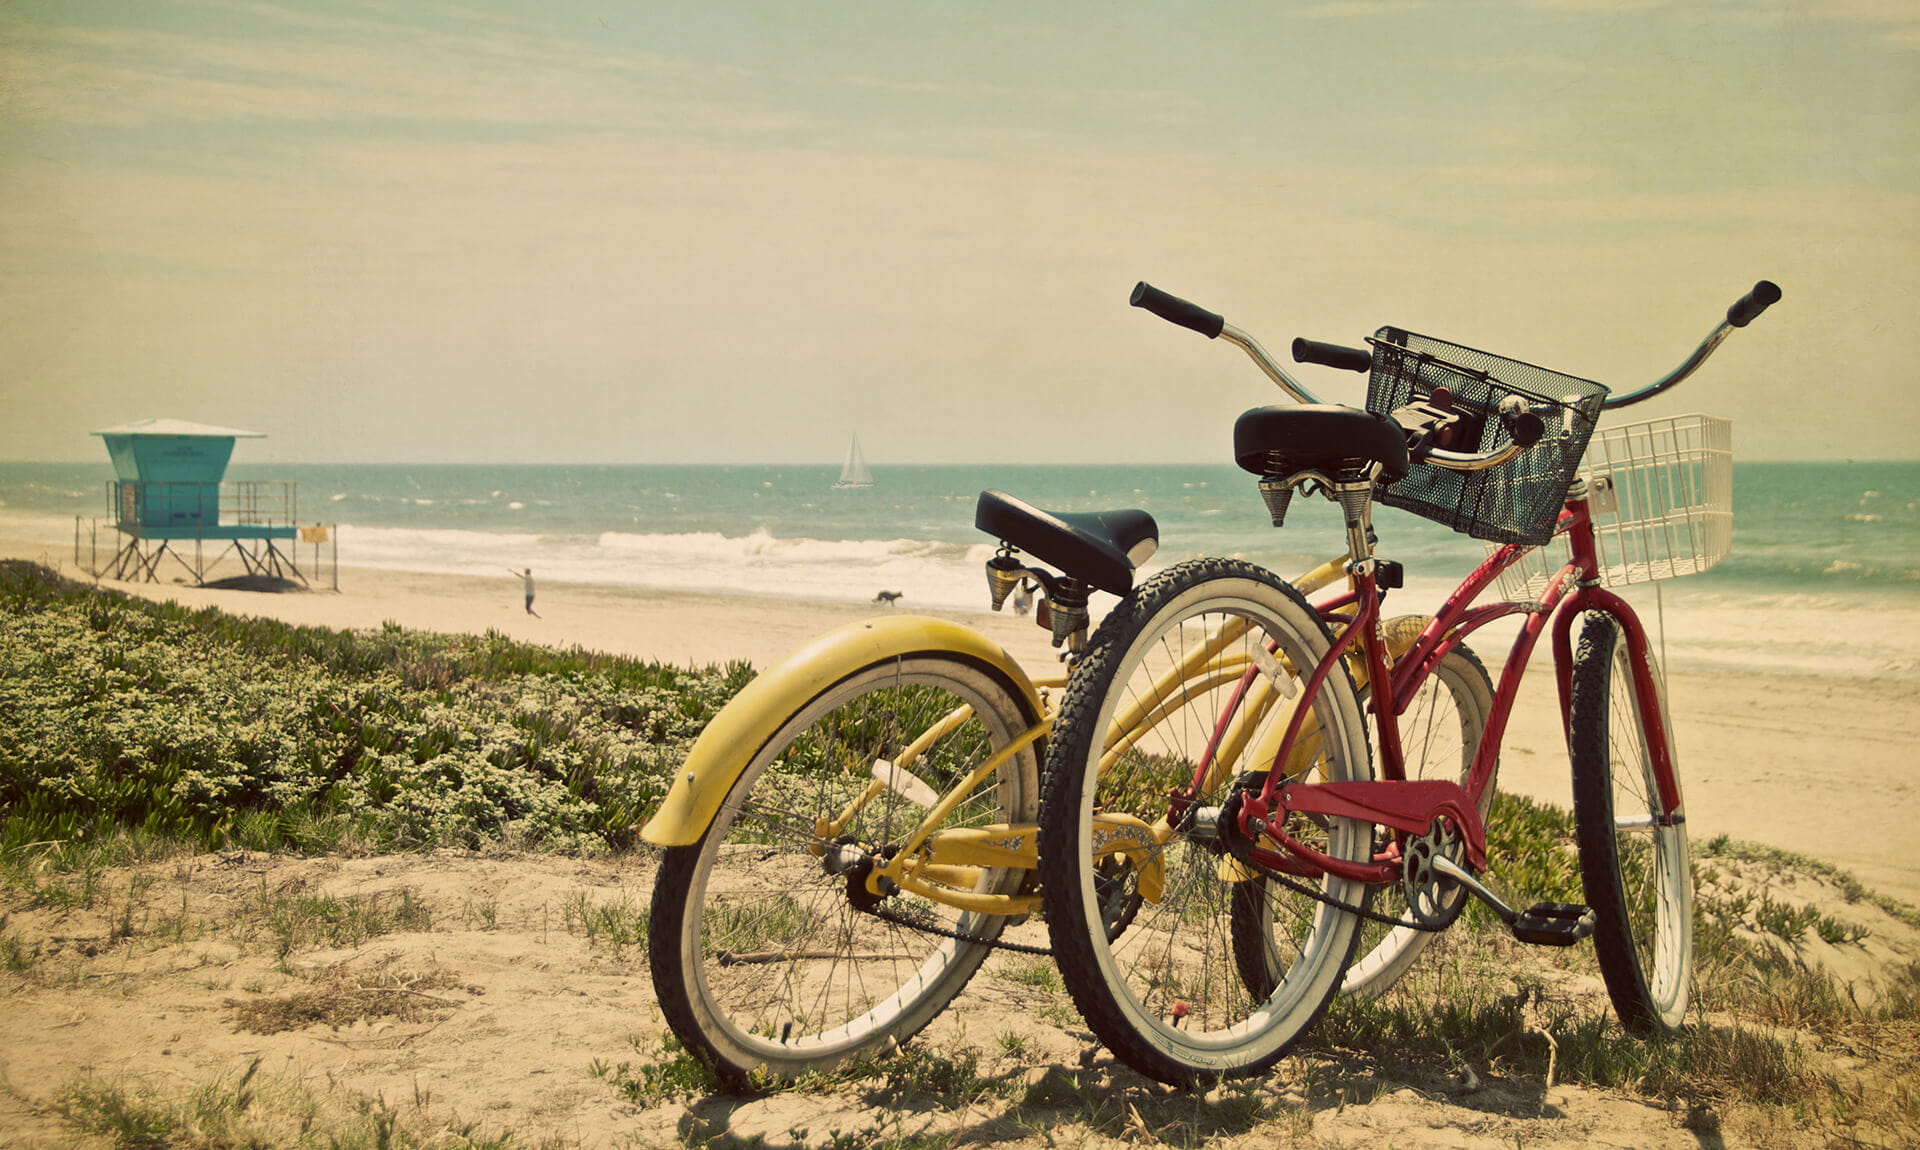 Yellow and red bikes on sand